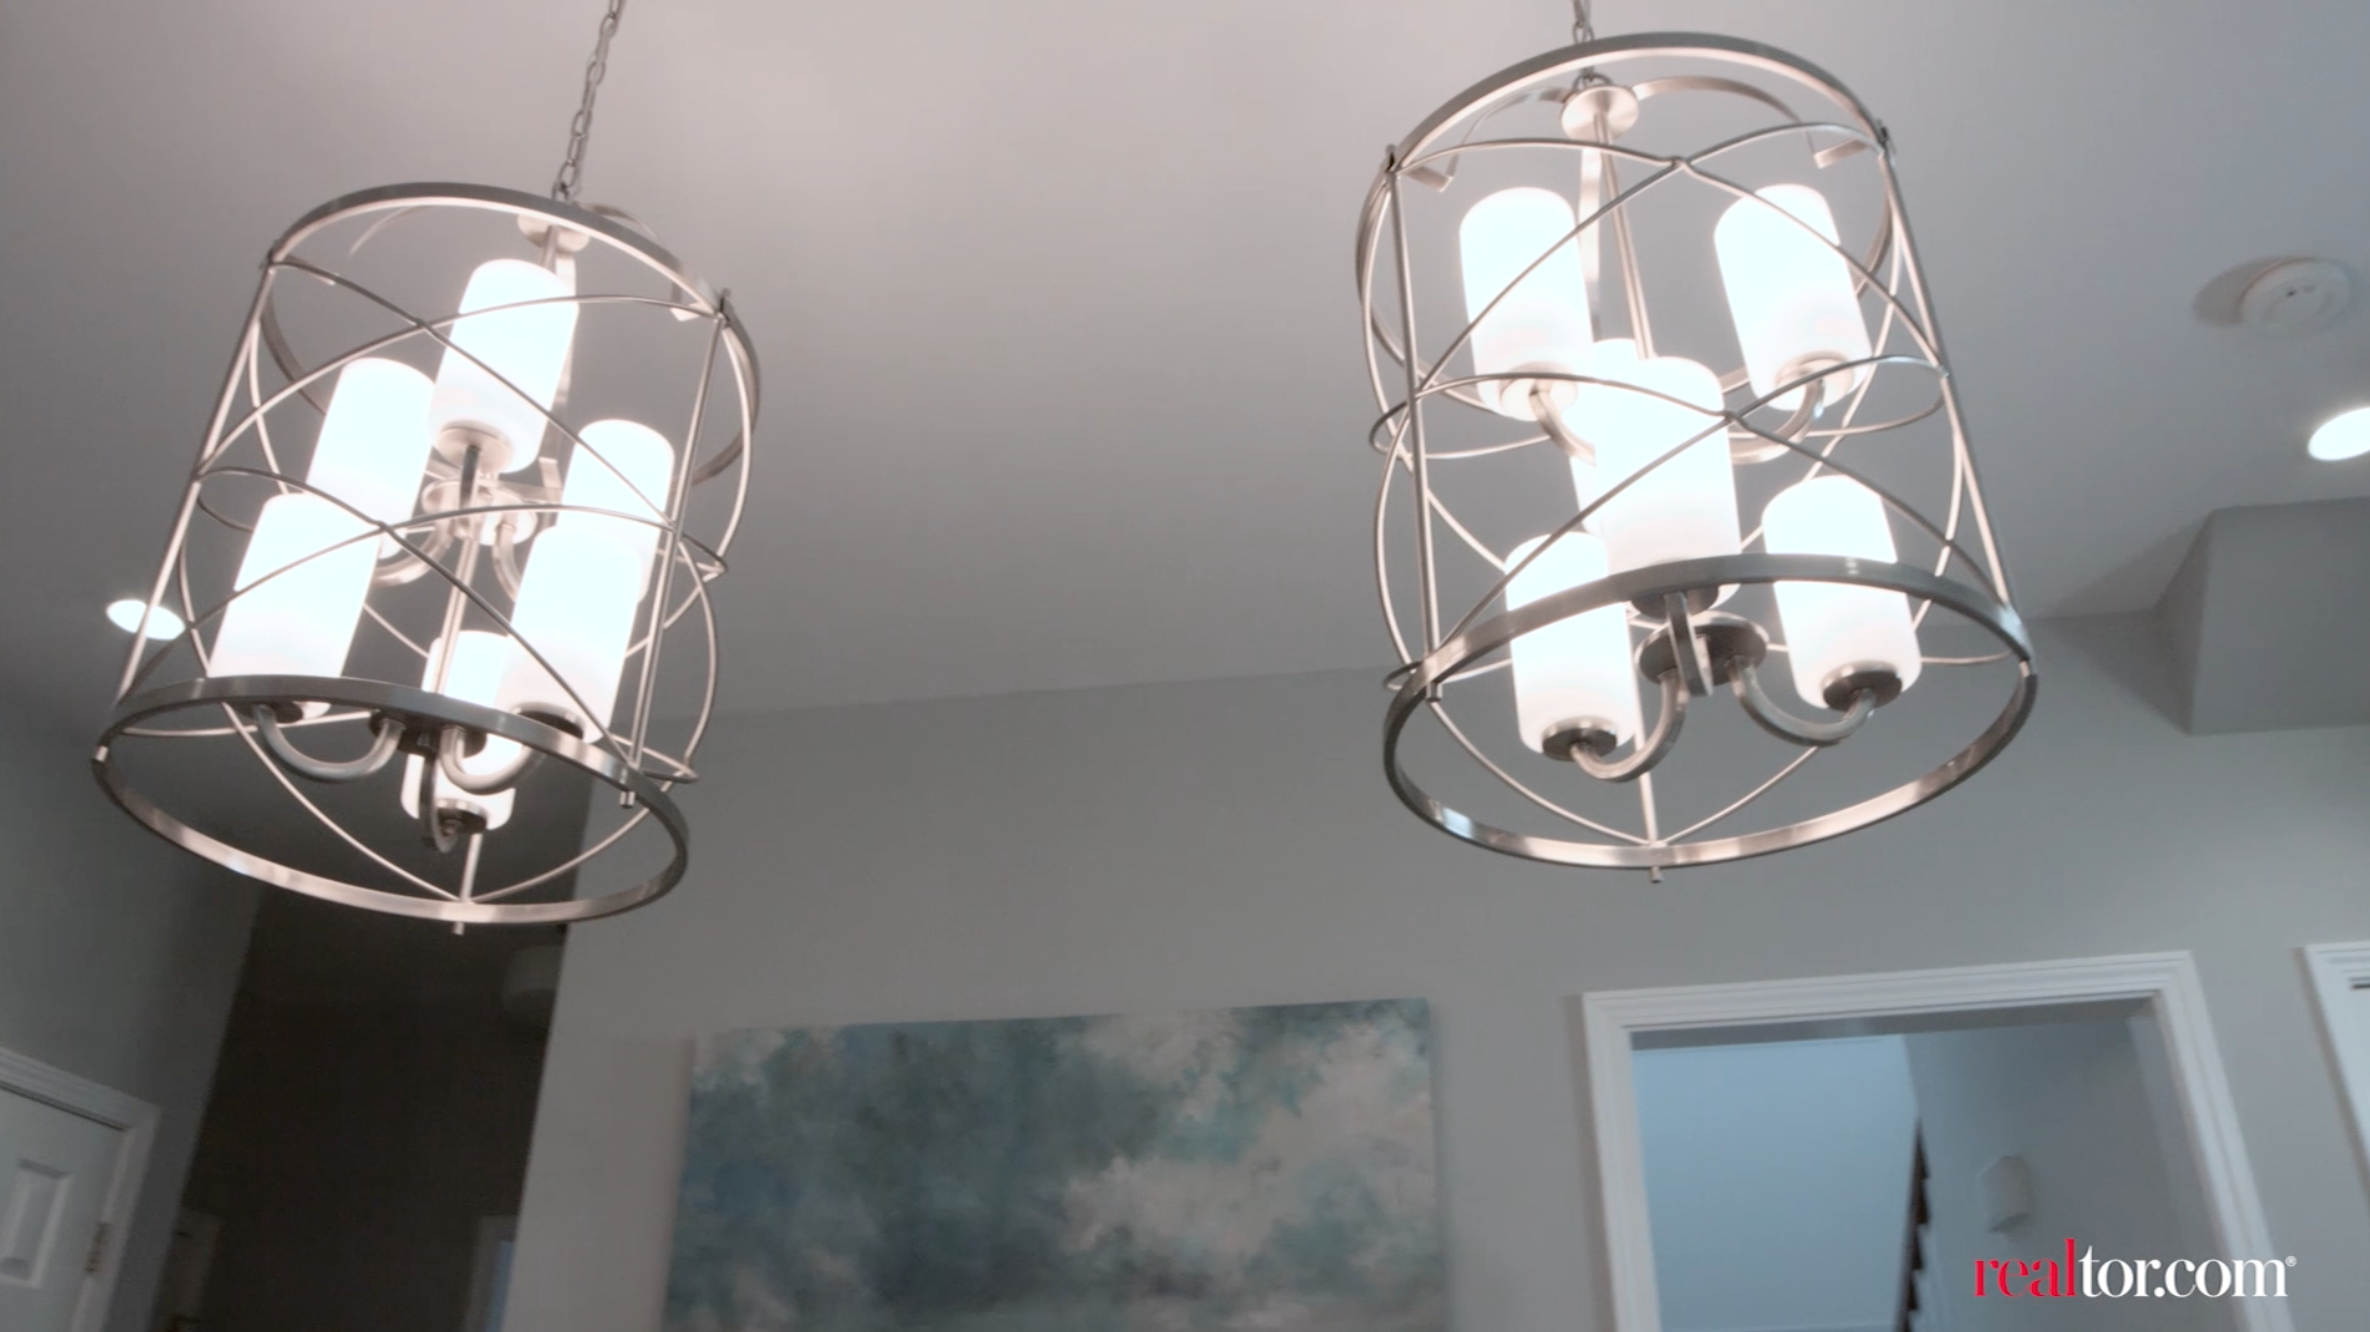 These unique chandeliers gave the room the "wow" factor that the Lightners craved. 